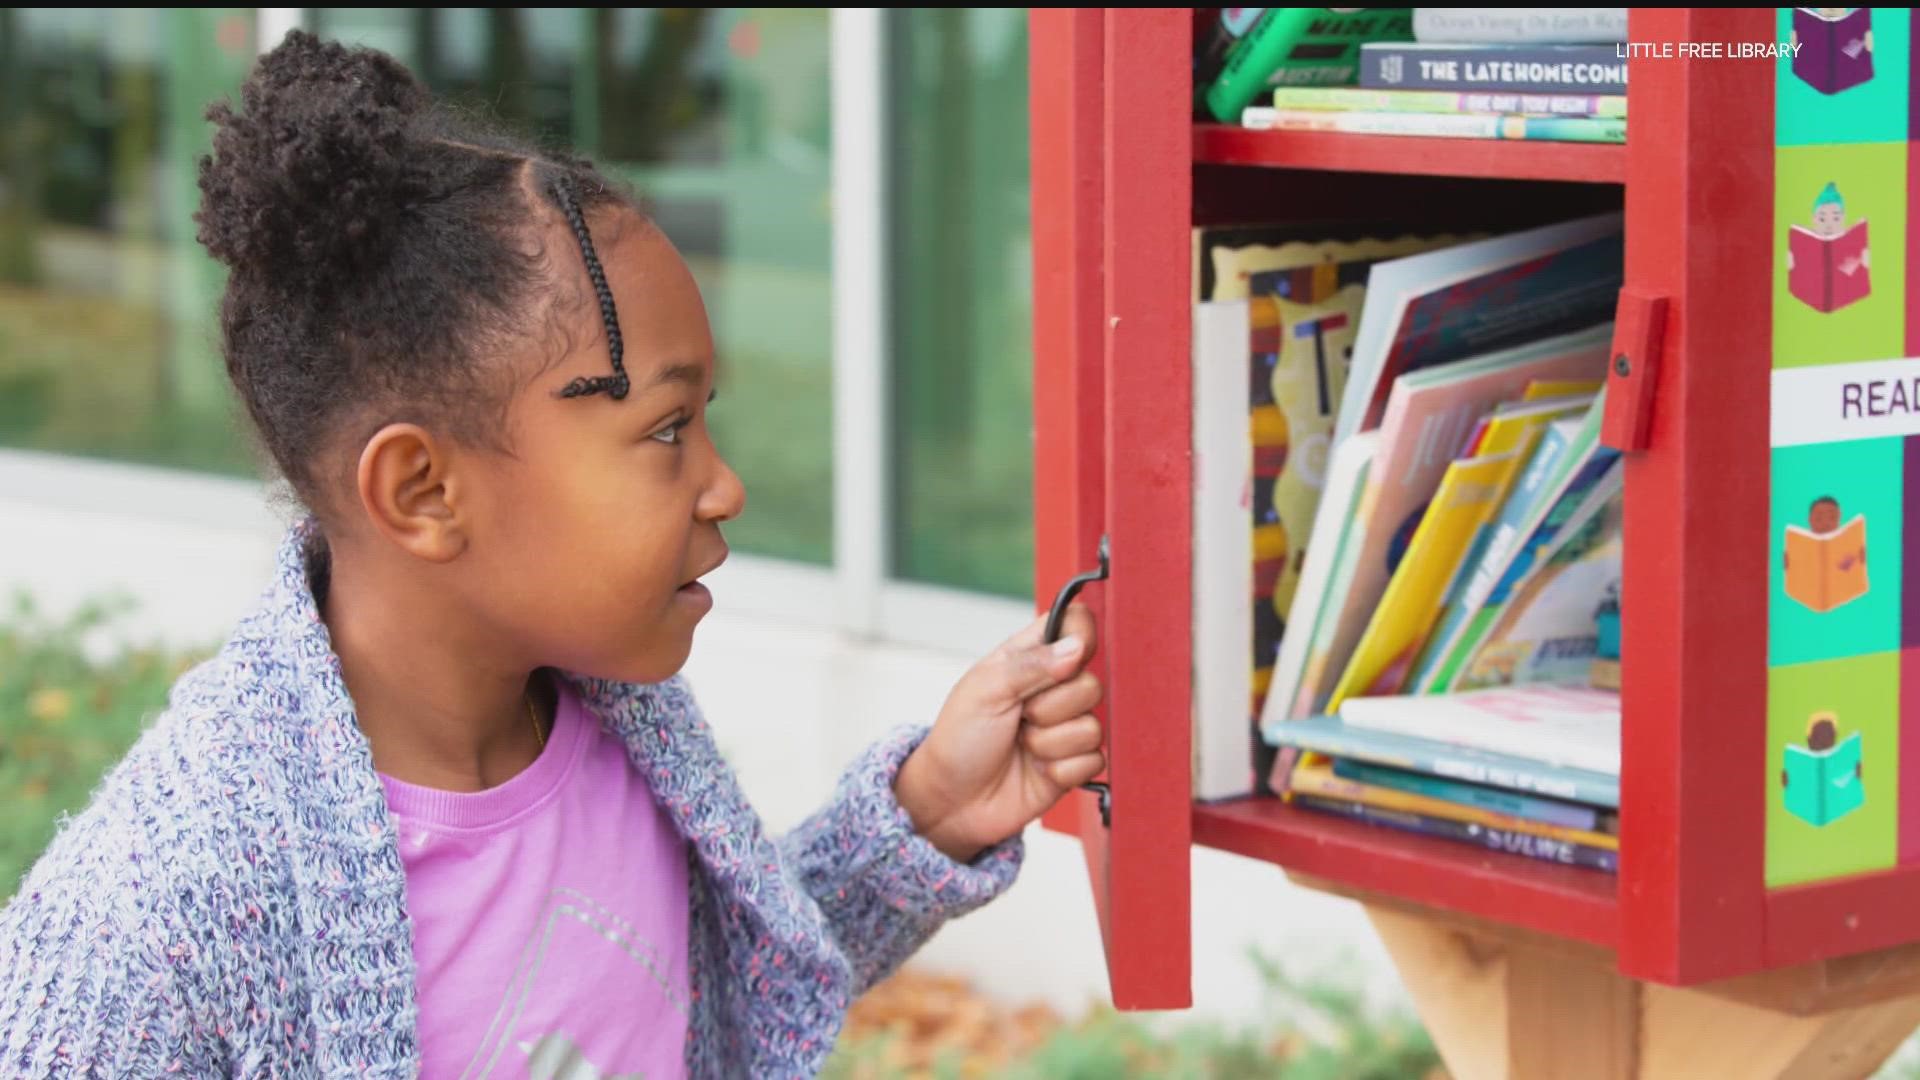 This partnership is bringing diverse books to communities of color through Little Free Libraries and Urban Ventures.